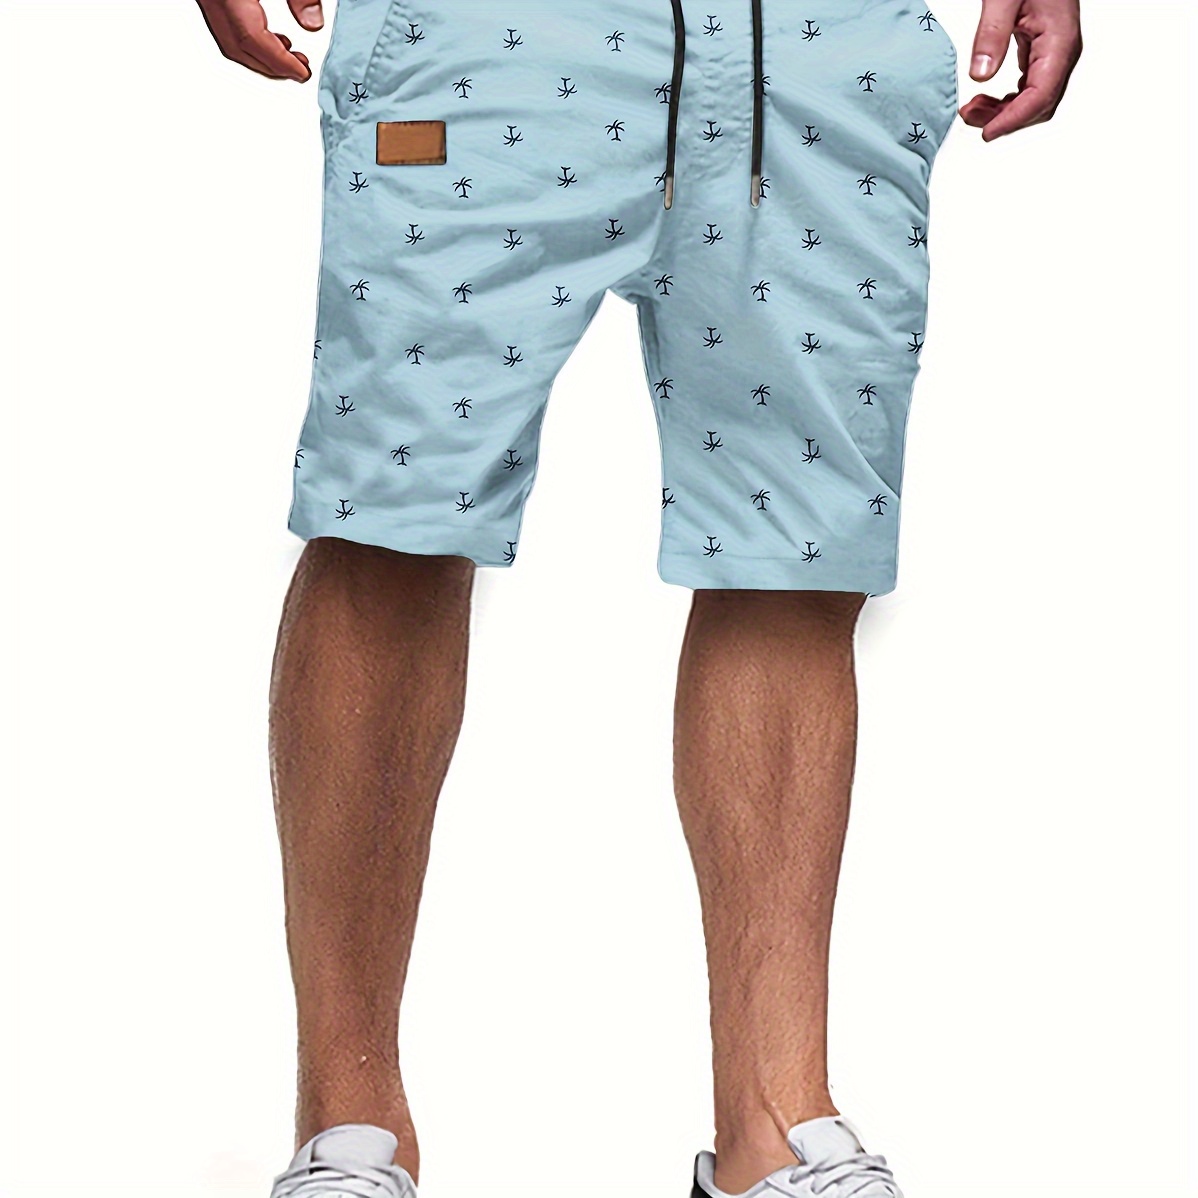 

Men's Casual Printed Cargo Shorts With Pockets For Summer, Bermuda Shorts